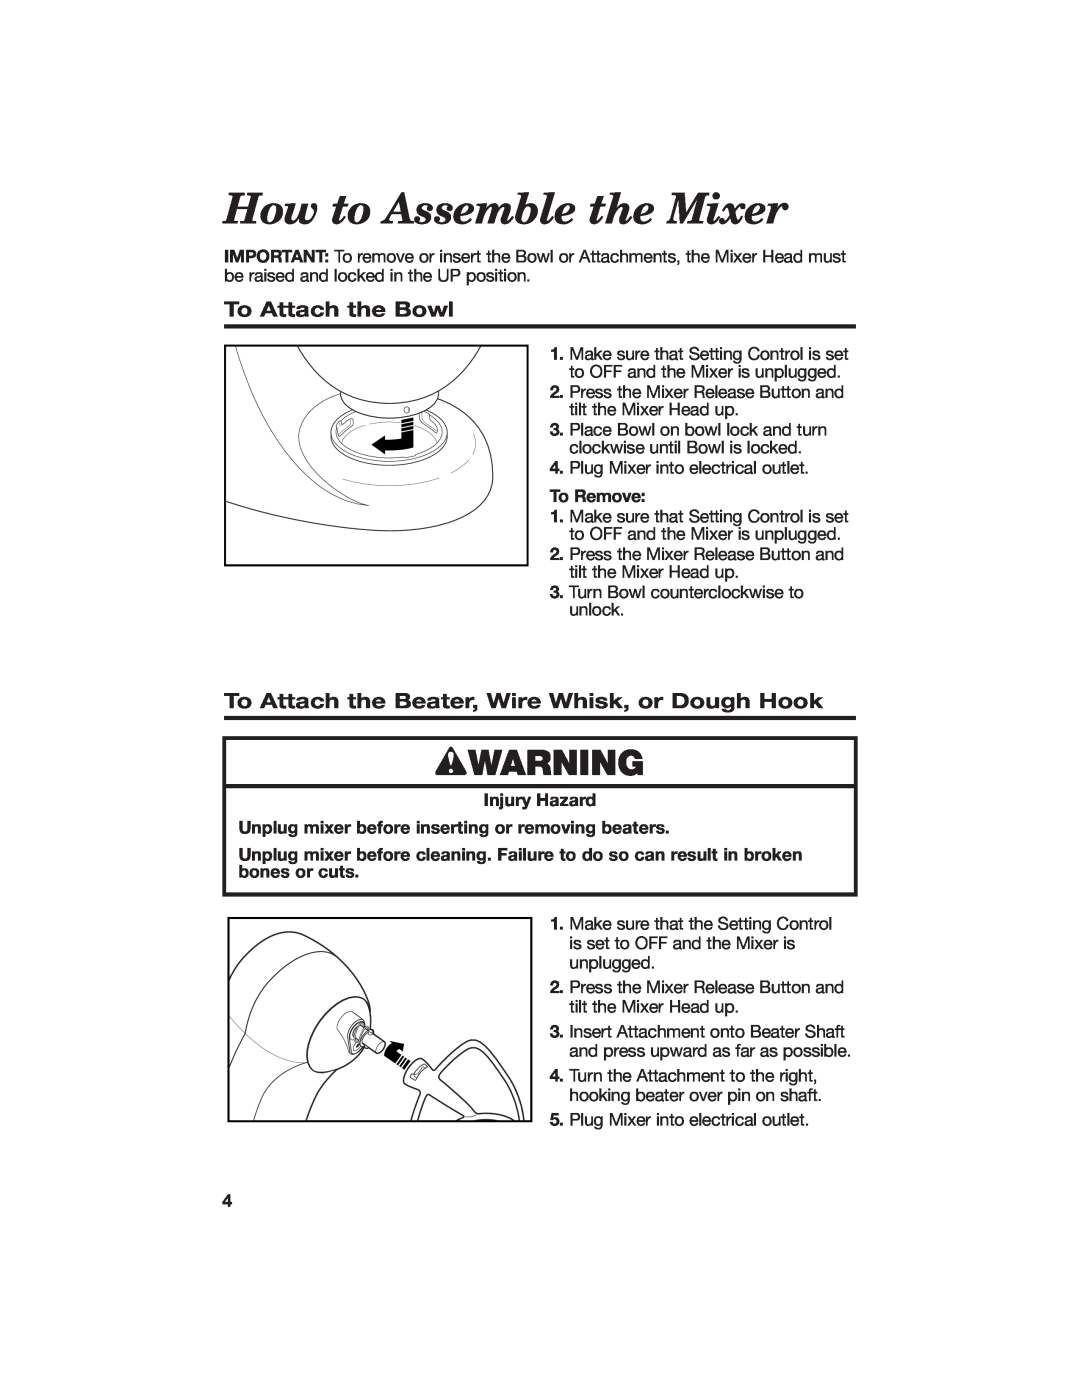 Hamilton Beach 840125800 How to Assemble the Mixer, To Attach the Bowl, To Attach the Beater, Wire Whisk, or Dough Hook 